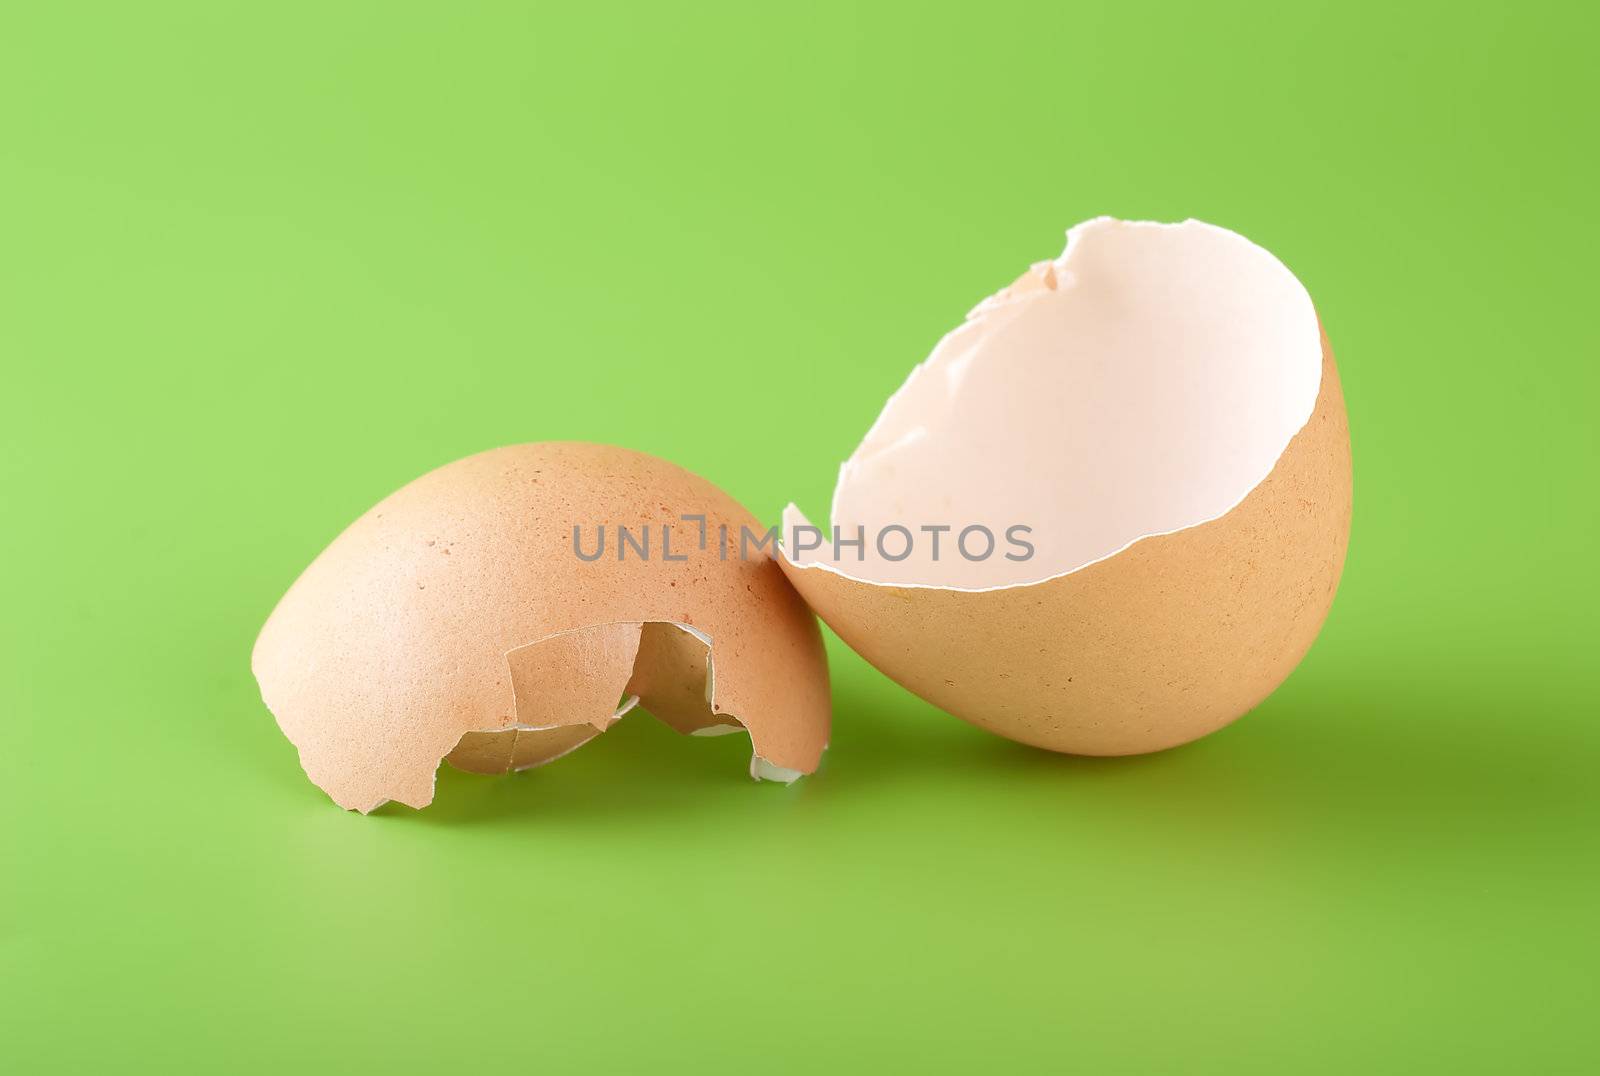 Two pieces of brown egg shell on a green background